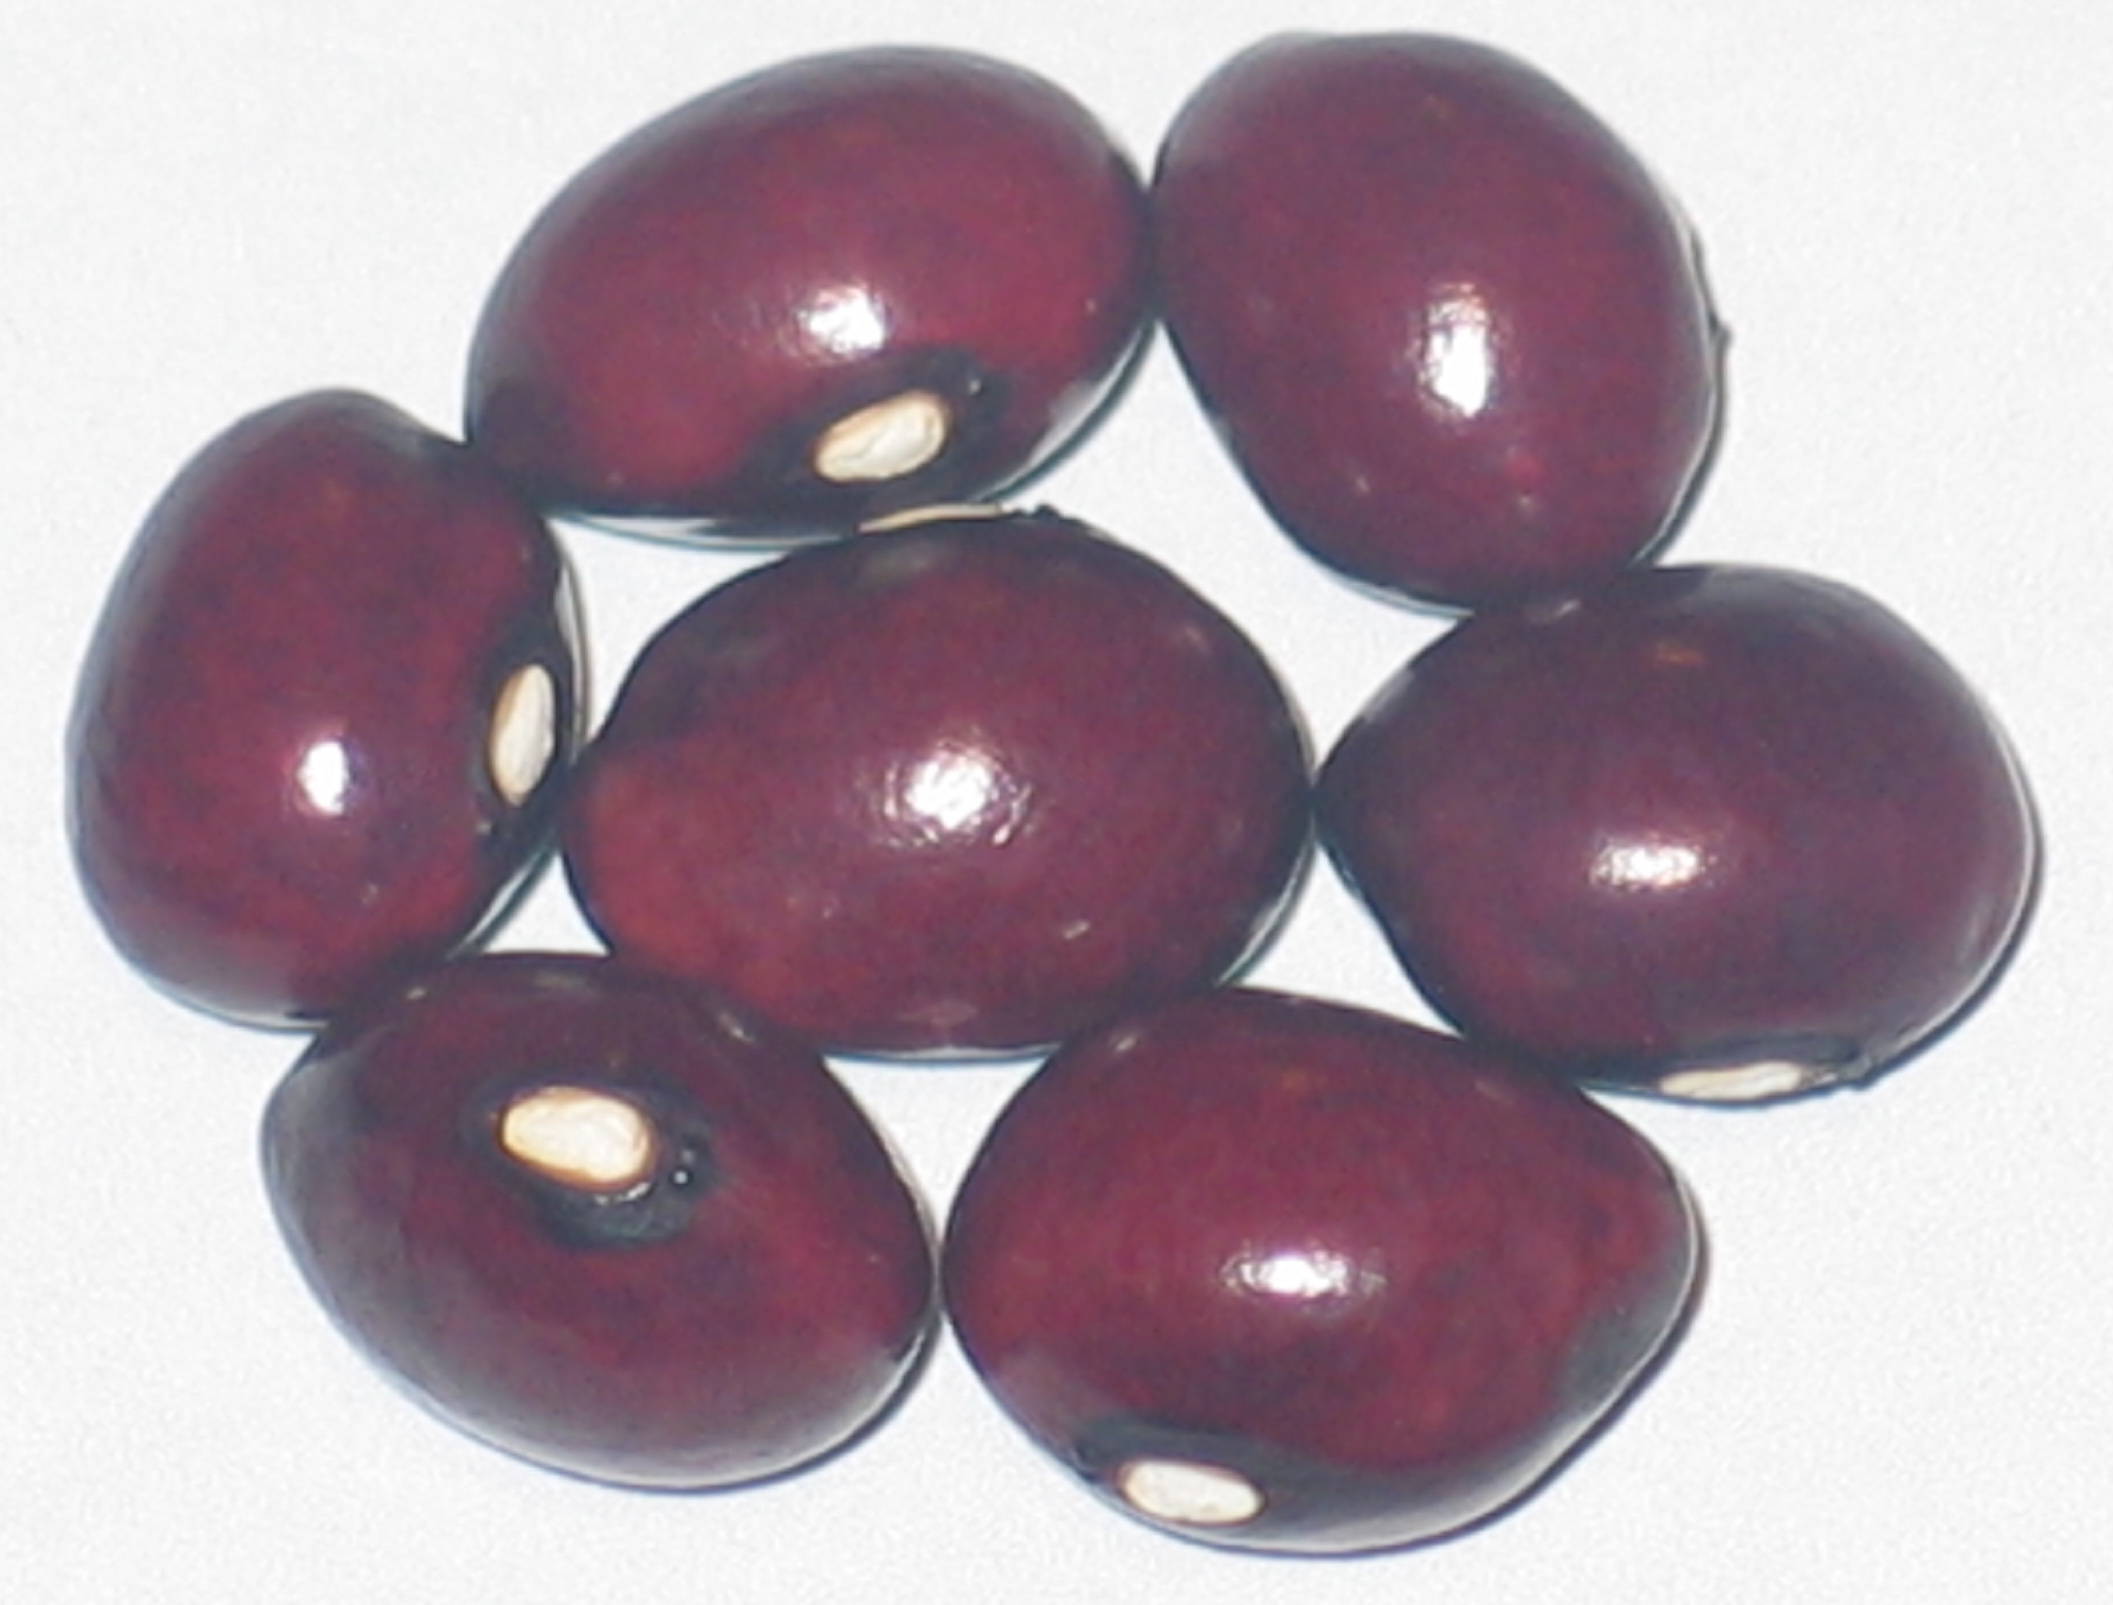 image of True Red Cranberry beans